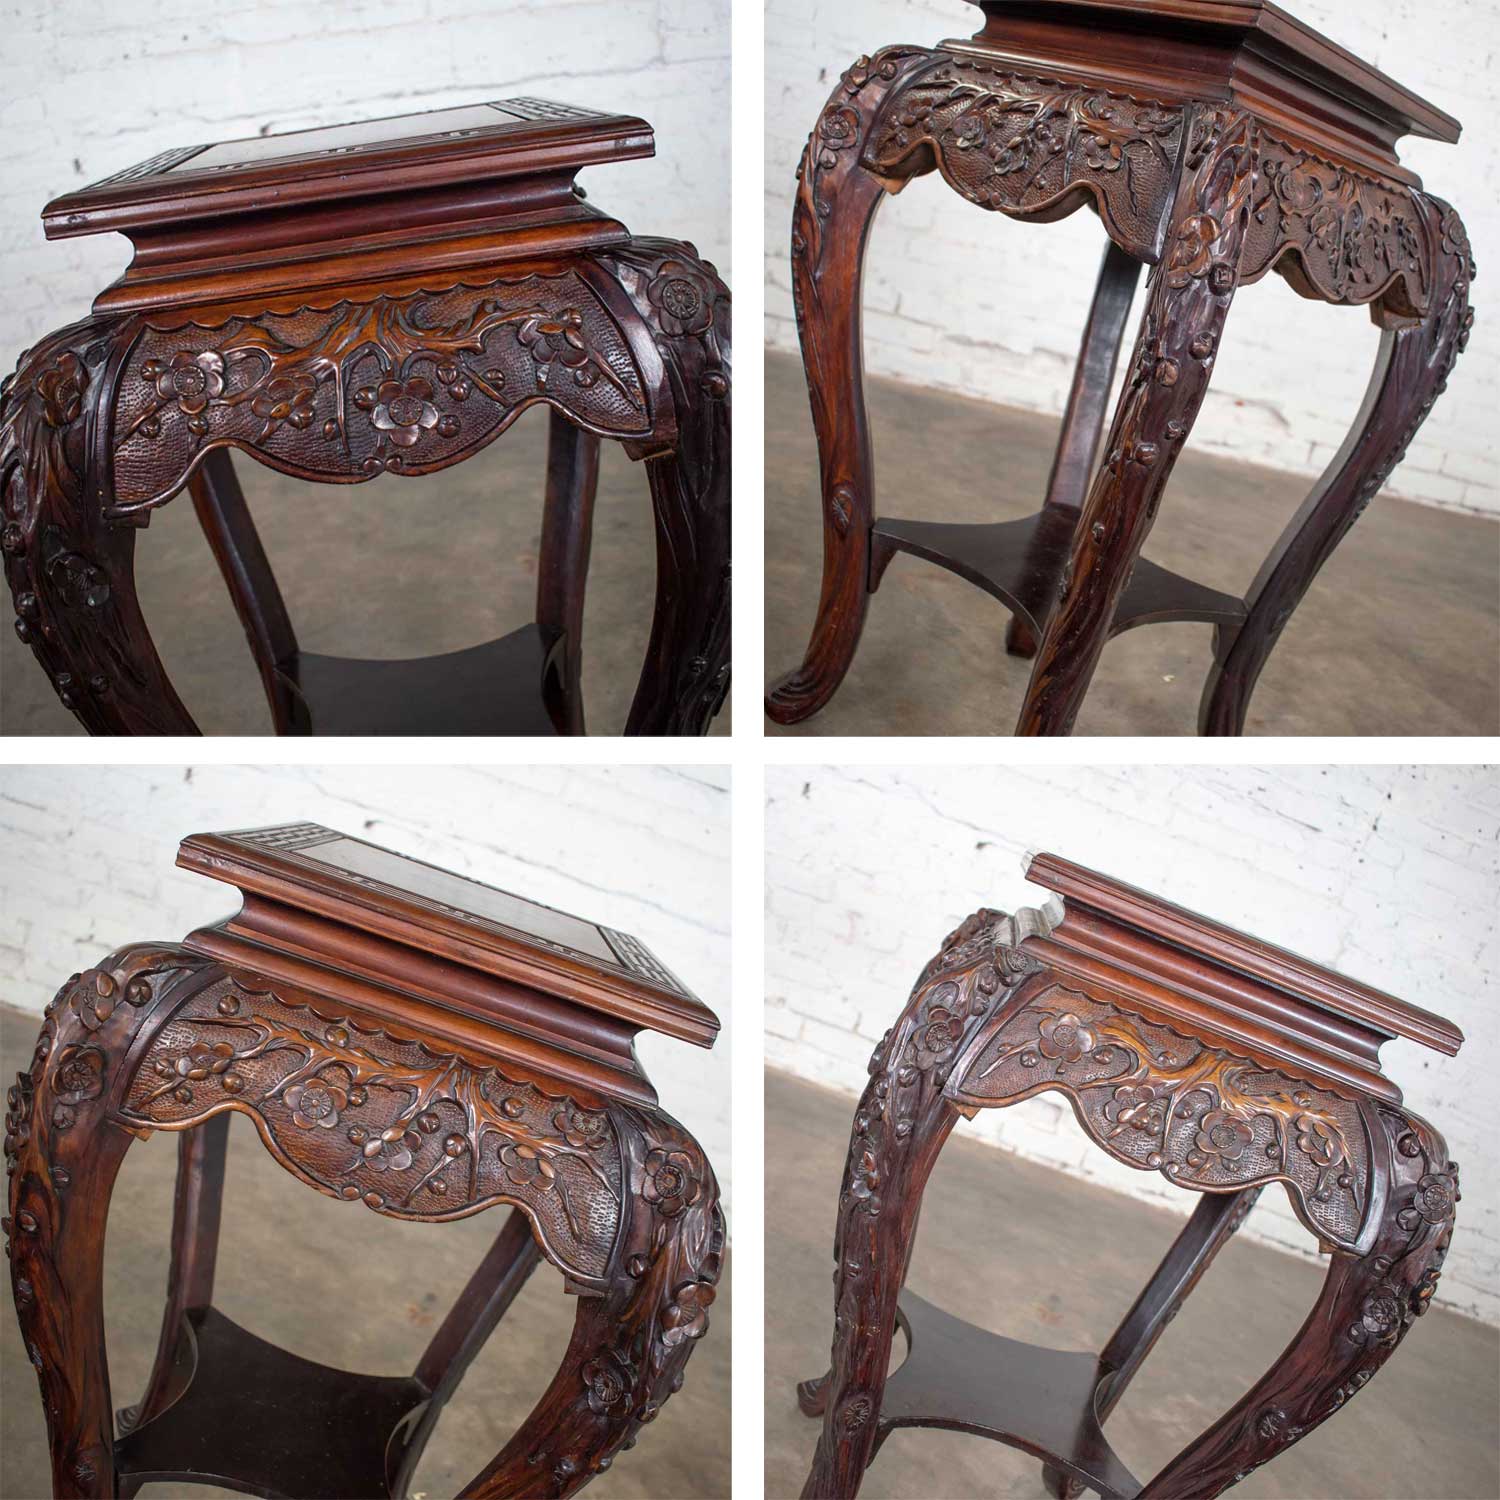 Antique Asian Pedestal Table Rosewood Color Hand Carved Cherry Blossoms